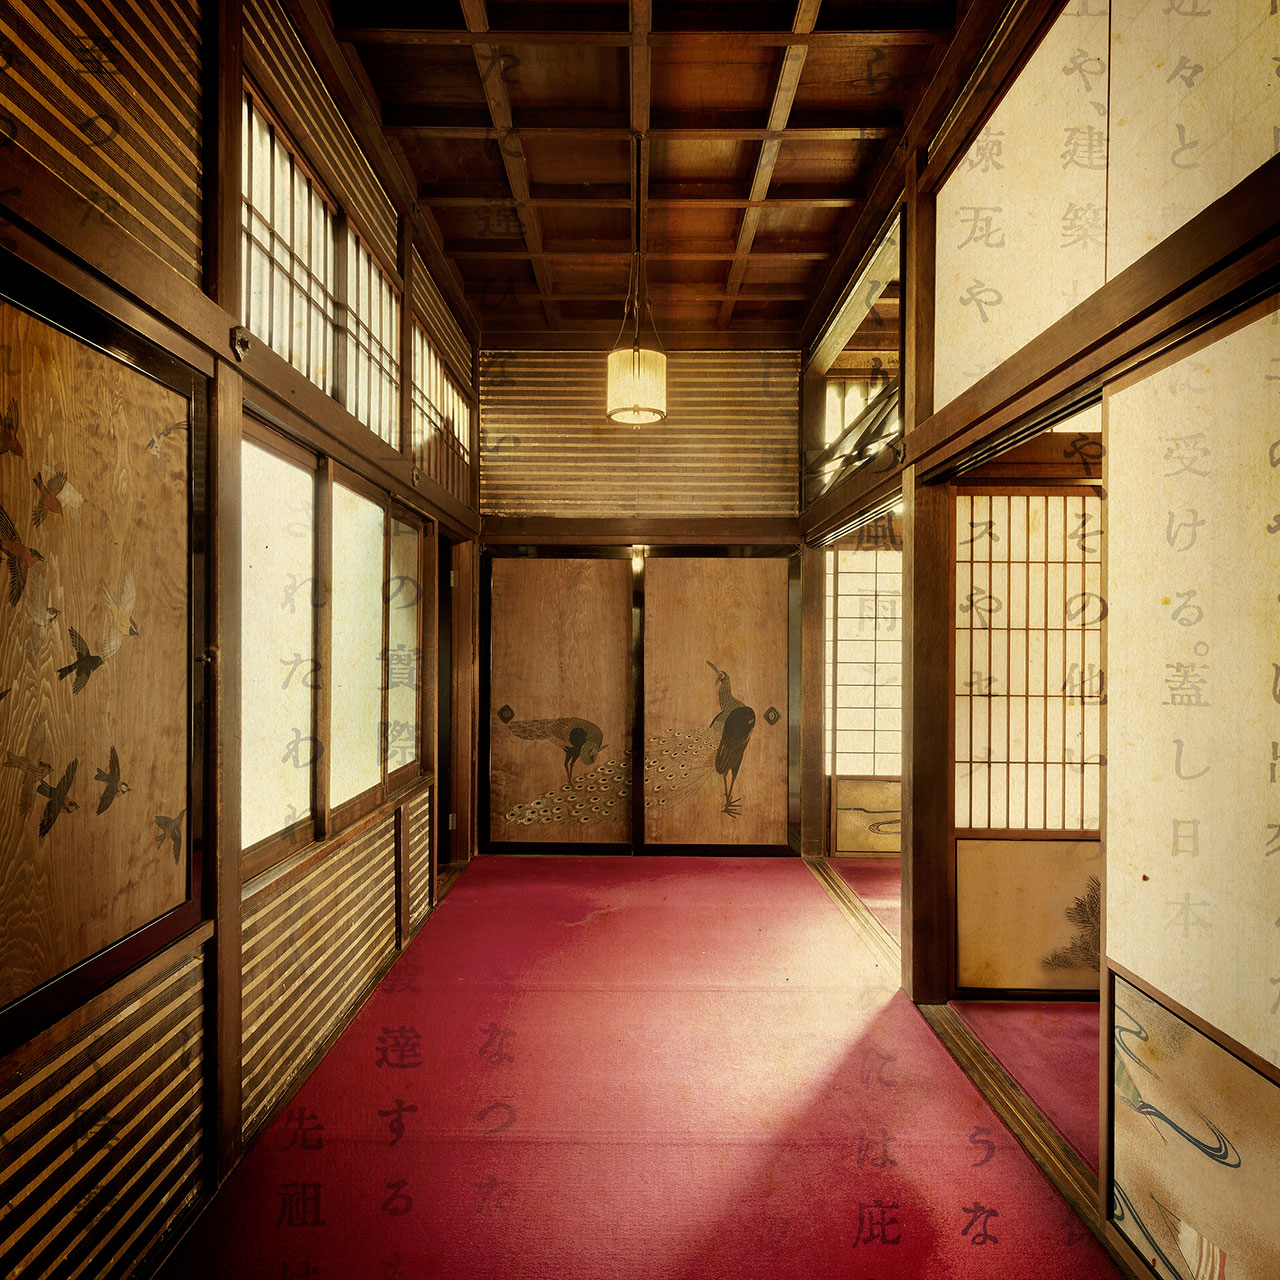 Inês d'Orey, Mitsui Residence, 1952. Transplanted House from Nishi-azabu, restored in 1996. 80x80cm. Photographic Fine Art Print.